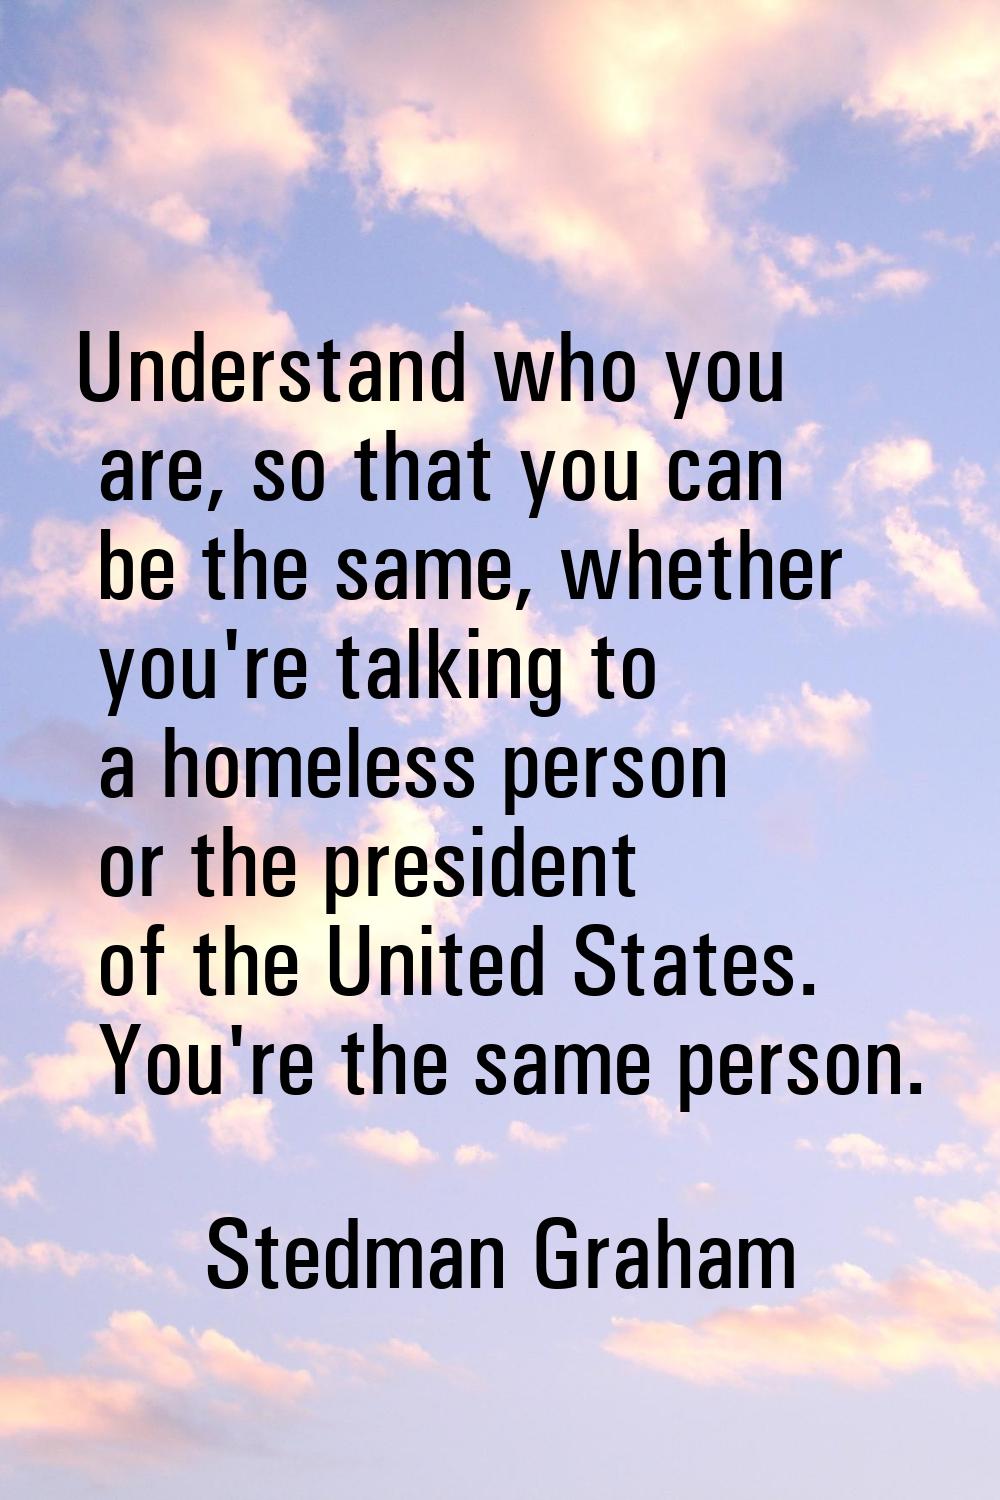 Understand who you are, so that you can be the same, whether you're talking to a homeless person or